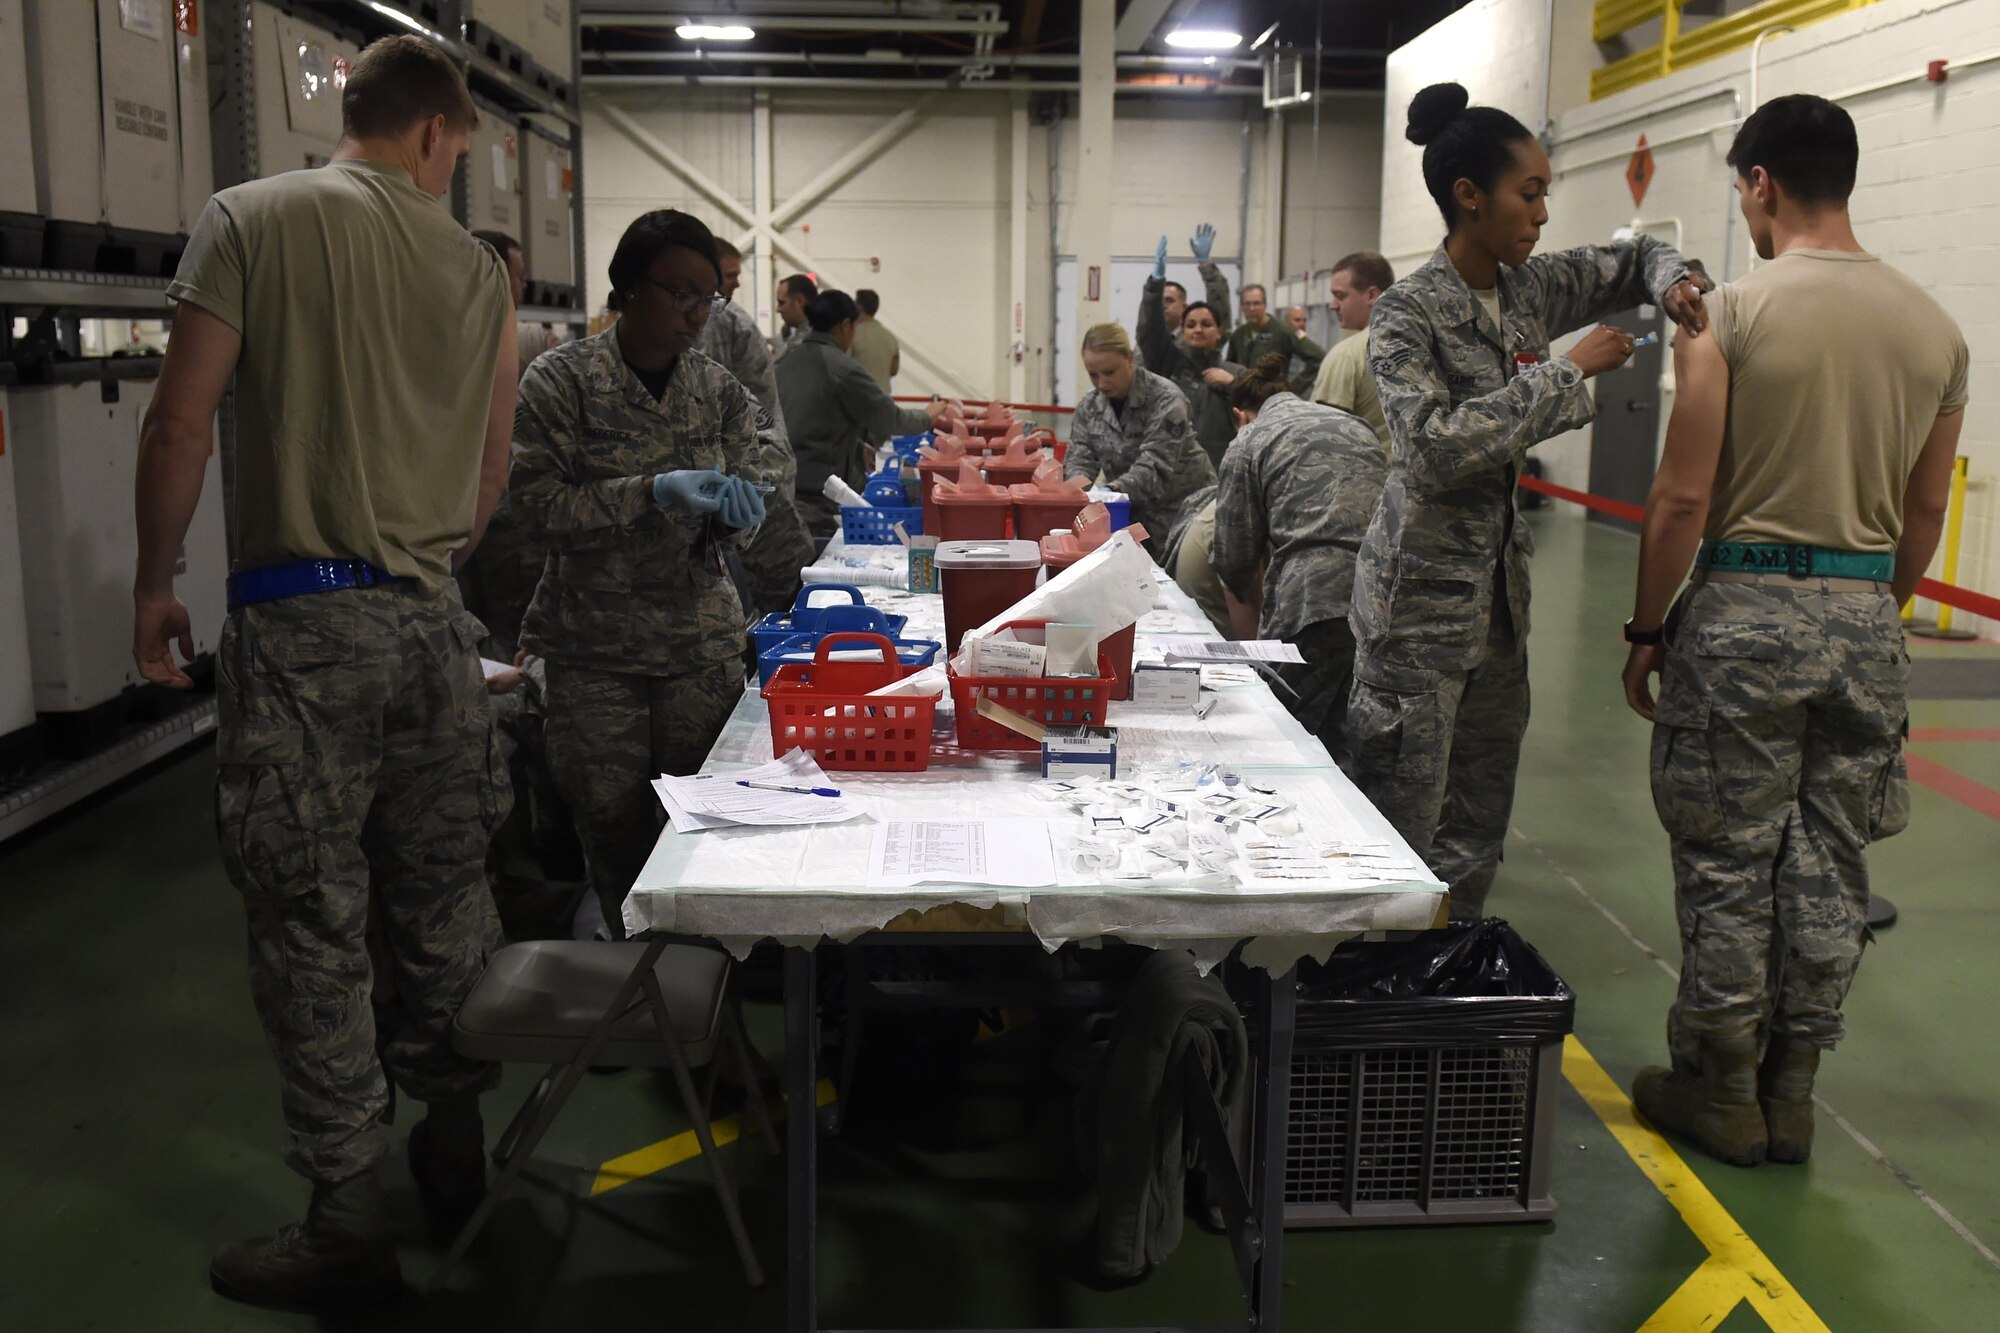 Airmen from the 62nd Medical Squadron administer annual flu vaccines Oct. 28, 2016, at Joint Base Lewis-McChord, Wash. The vaccines were administered as part of a point of dispensing exercise. (U.S. Air Force photo\ Tech. Sgt. Tim Chacon)